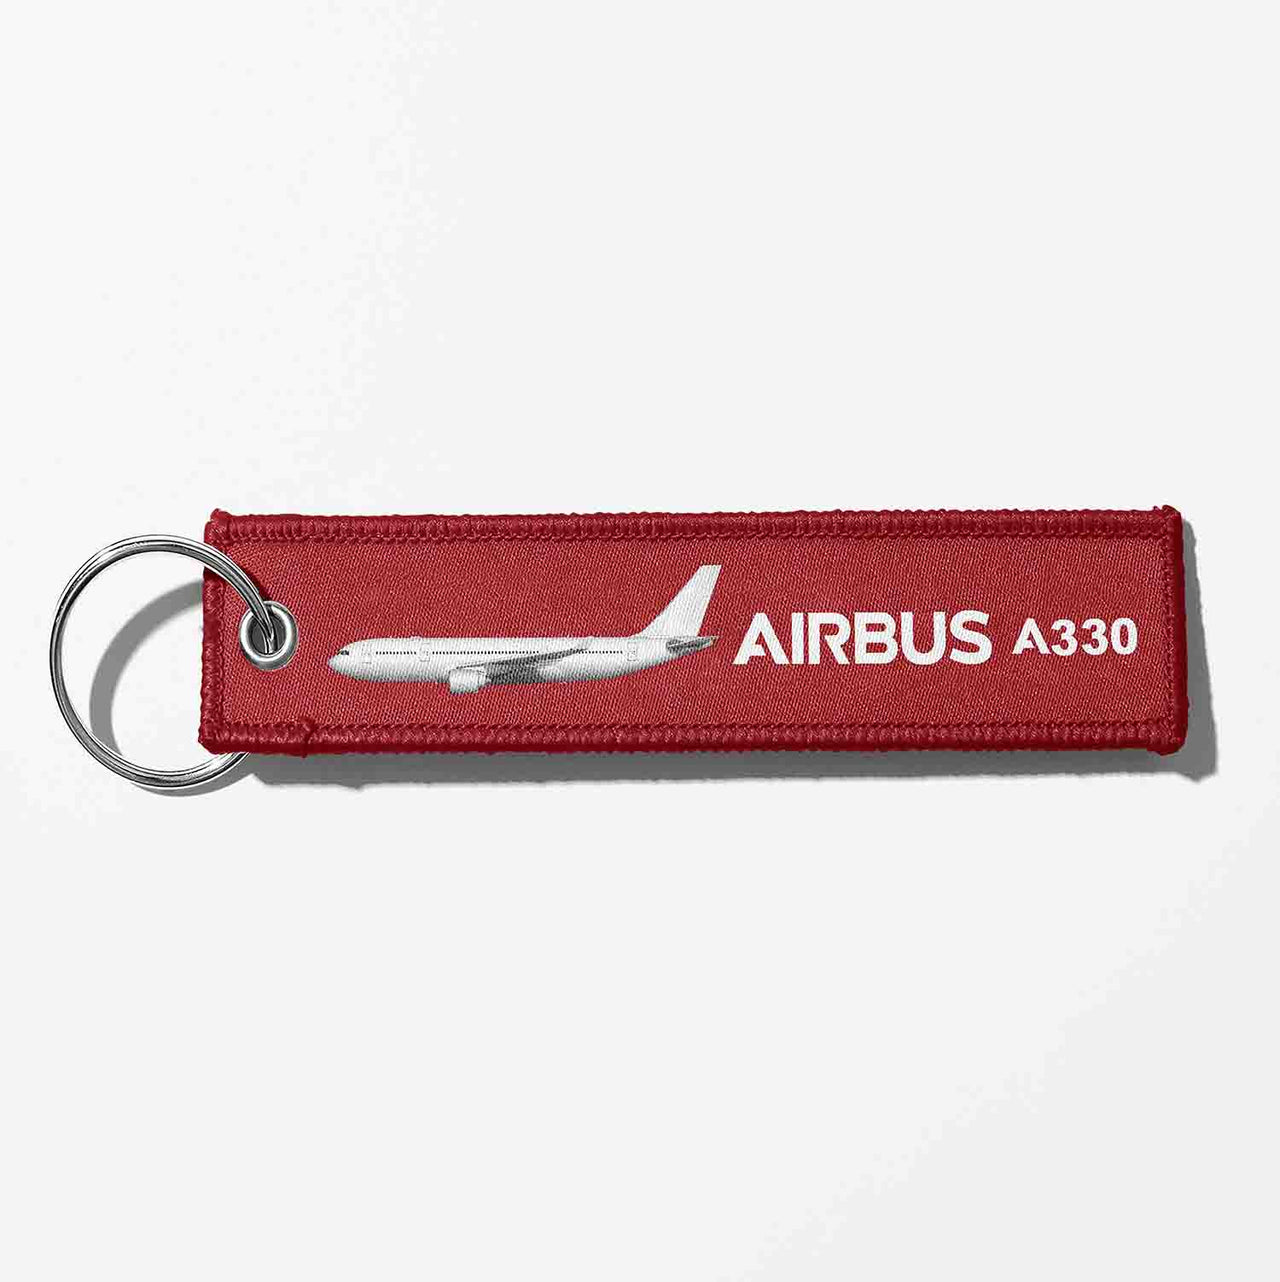 The Airbus A330 Designed Key Chains